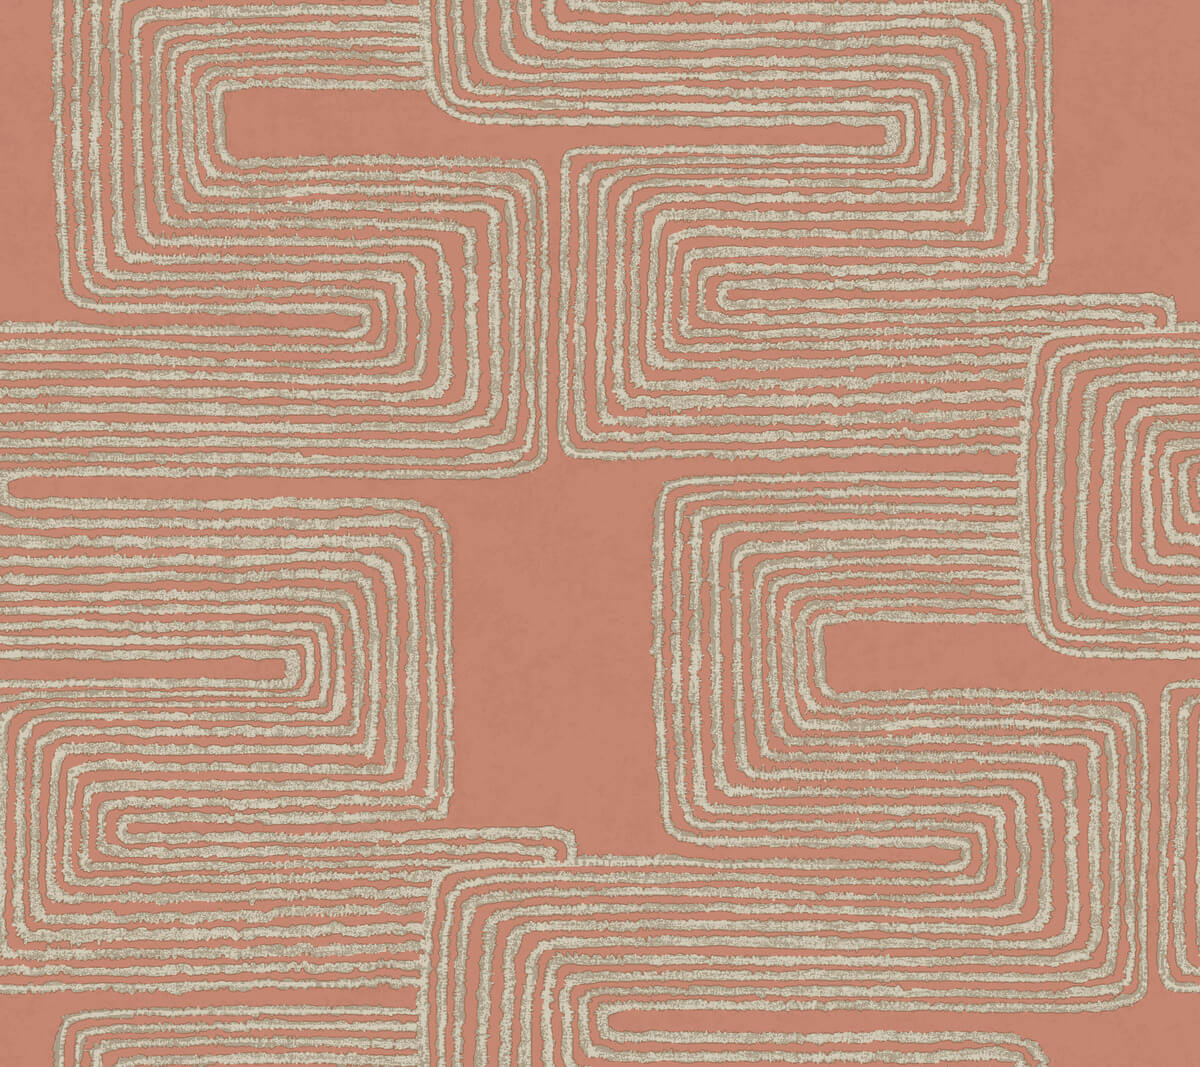 Artistic Abstracts Zulu Thread Wallpaper - Red